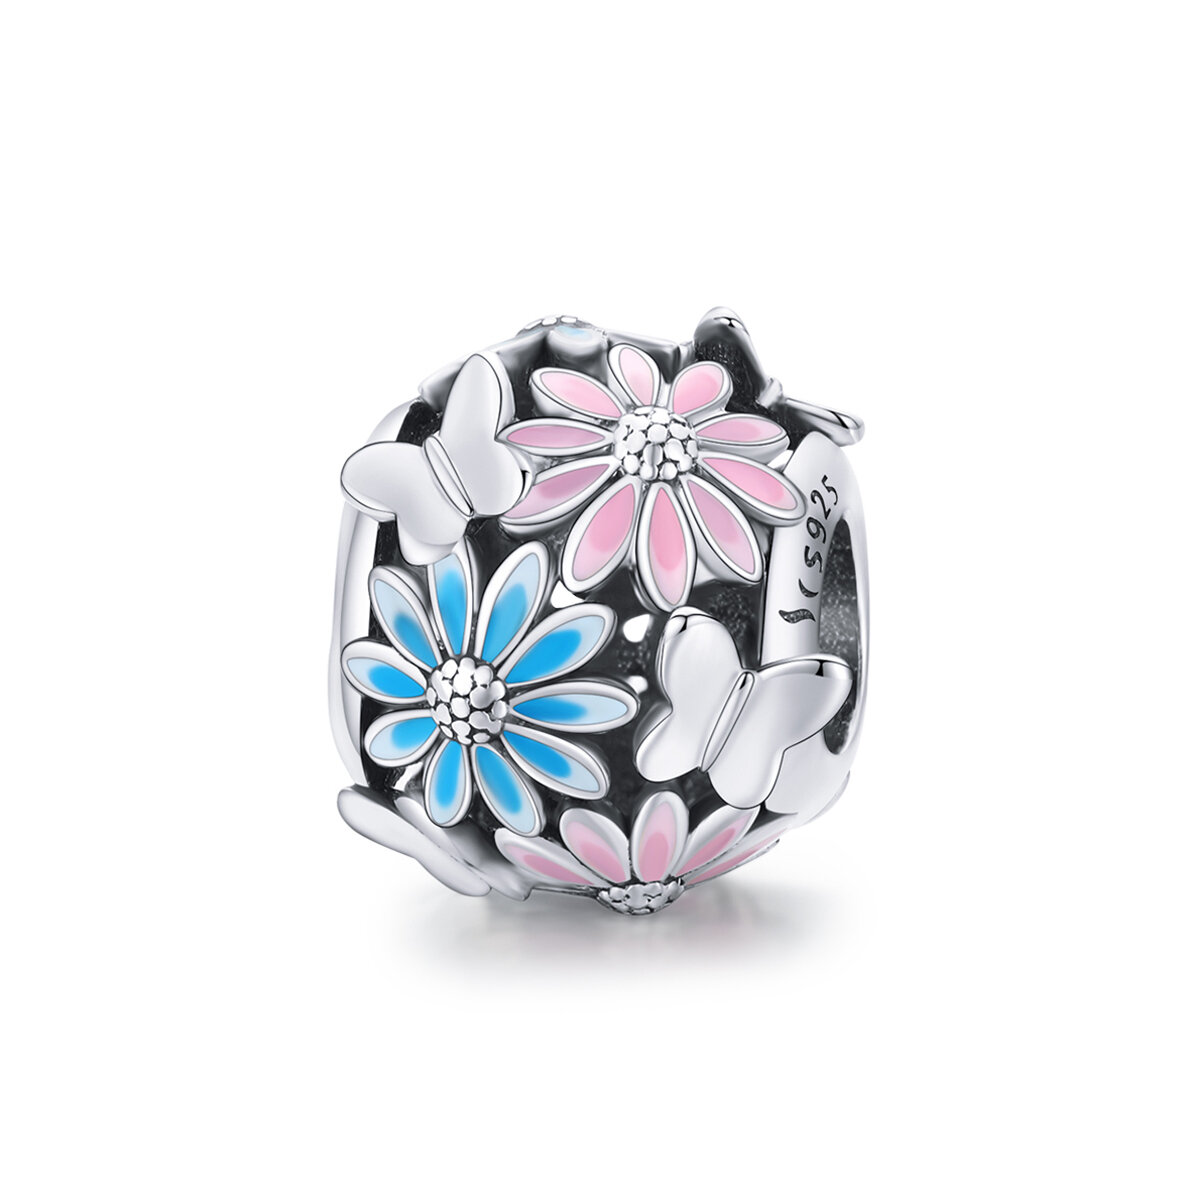 GemKing SCC1837 Bright daisy S925 Sterling Silver Charm